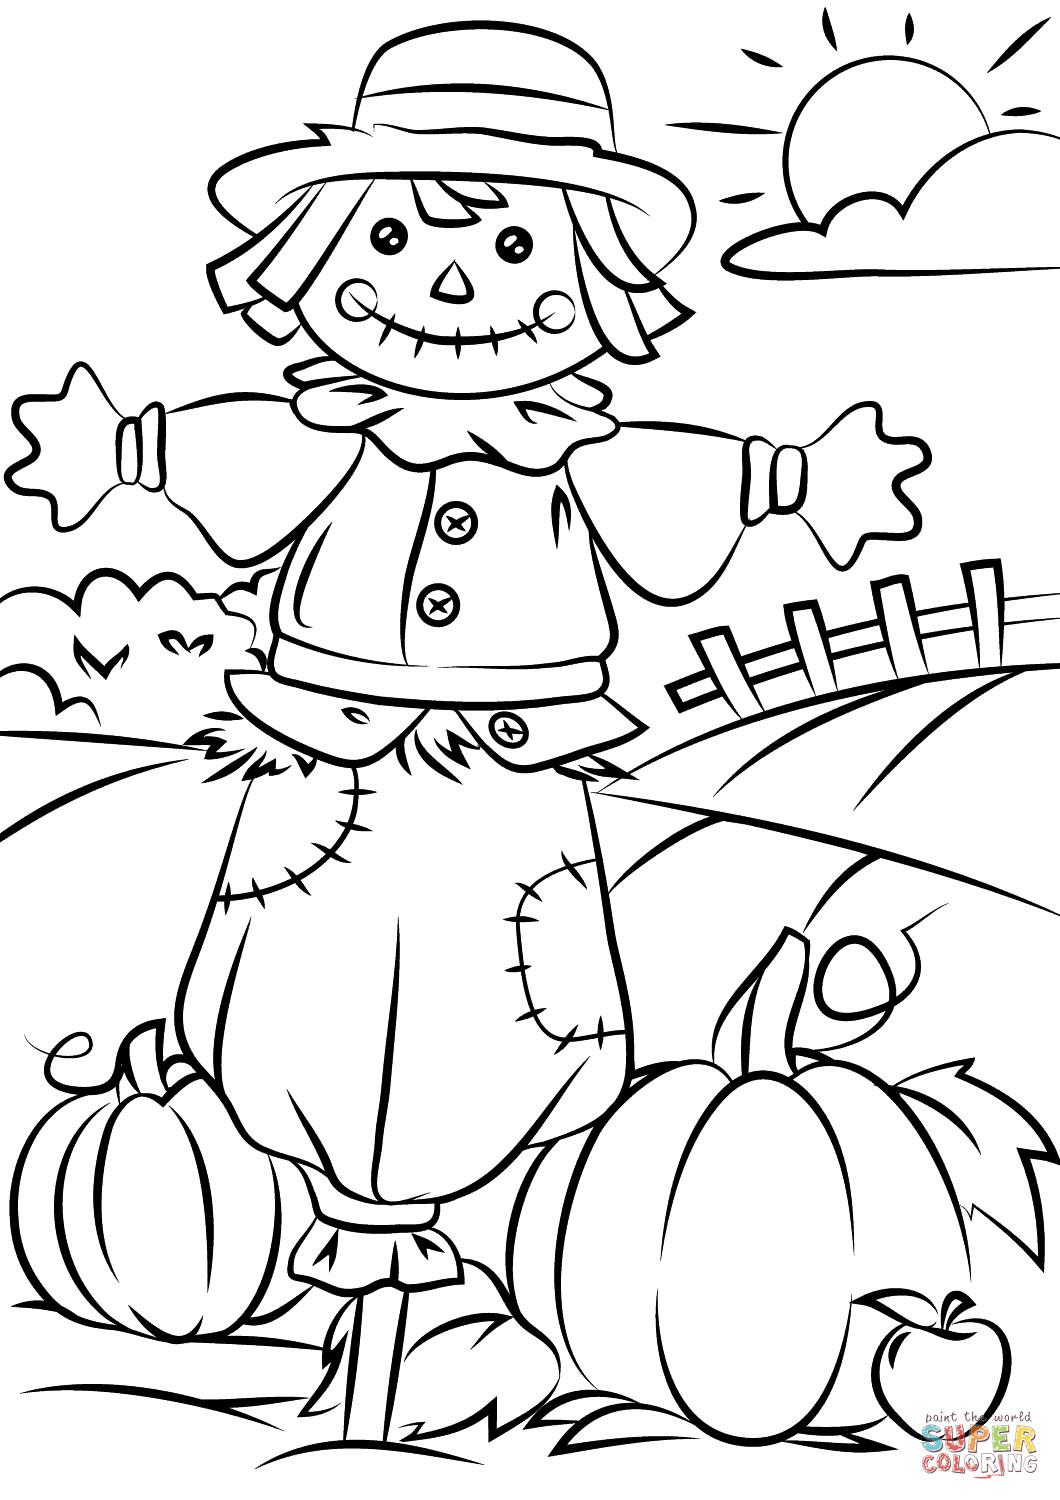 Fall Kids Coloring Pages
 Autumn Scene with Scarecrow coloring page